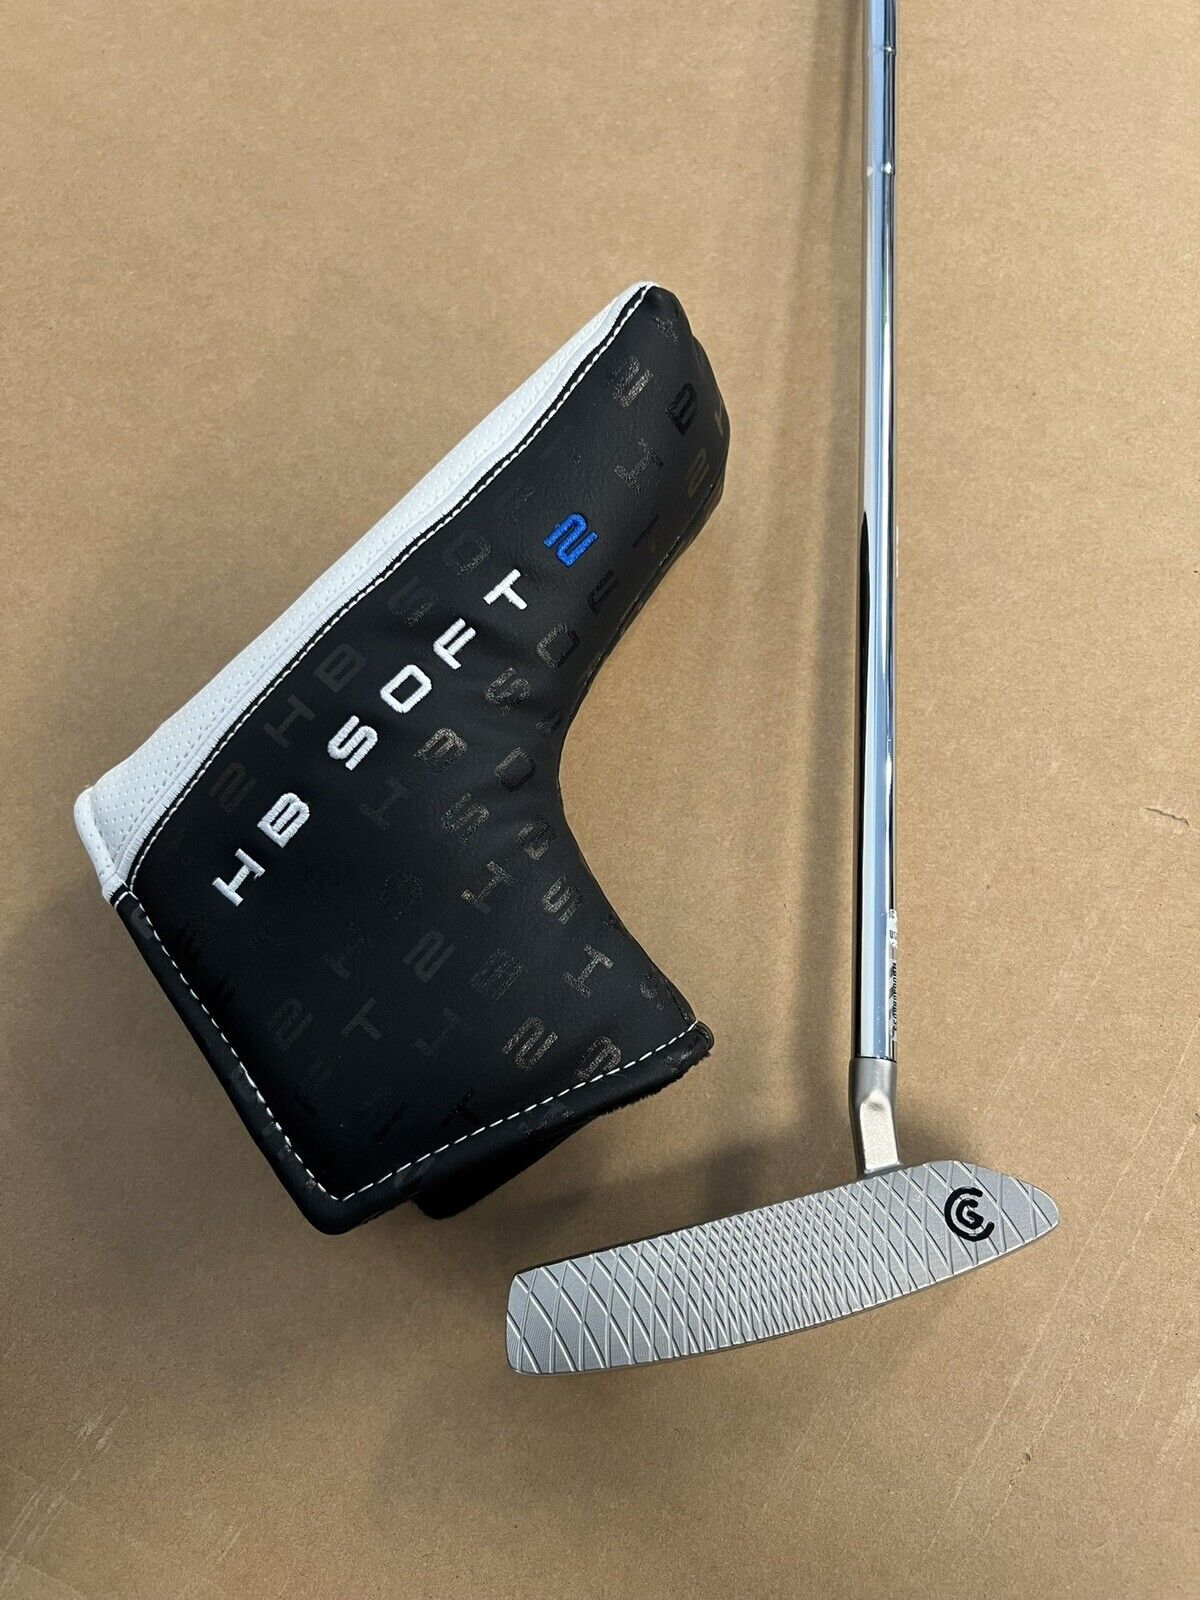 Cleveland HB SOFT 2 #8S Putter Slant Neck 33.5”, Immaculate!